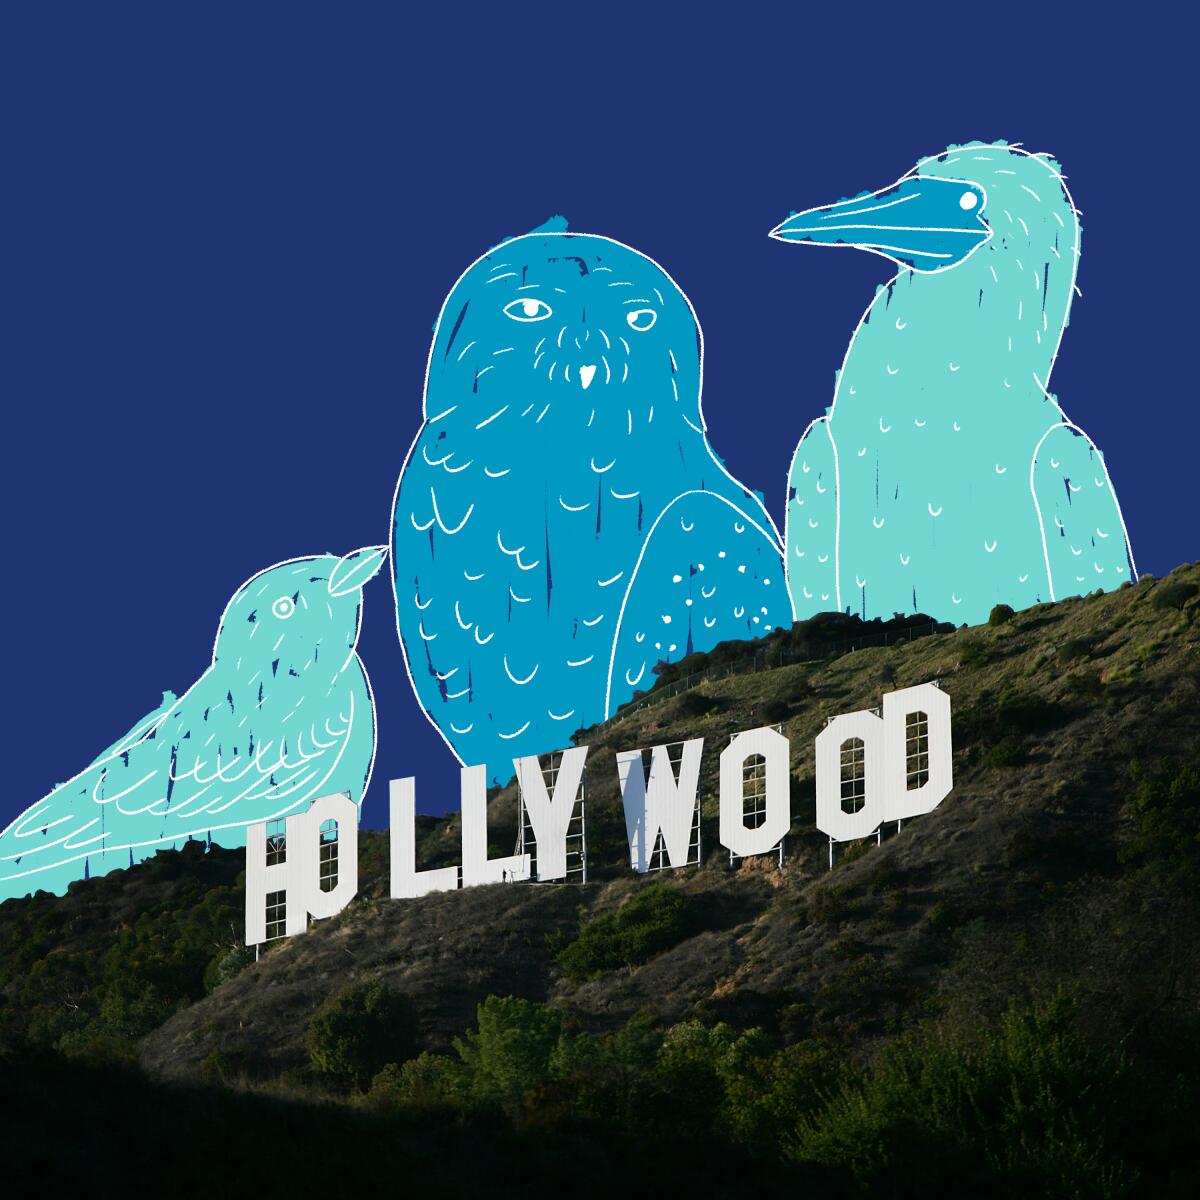 Illustration shows depictions of three oversized birds alongside the Hollywood sign.